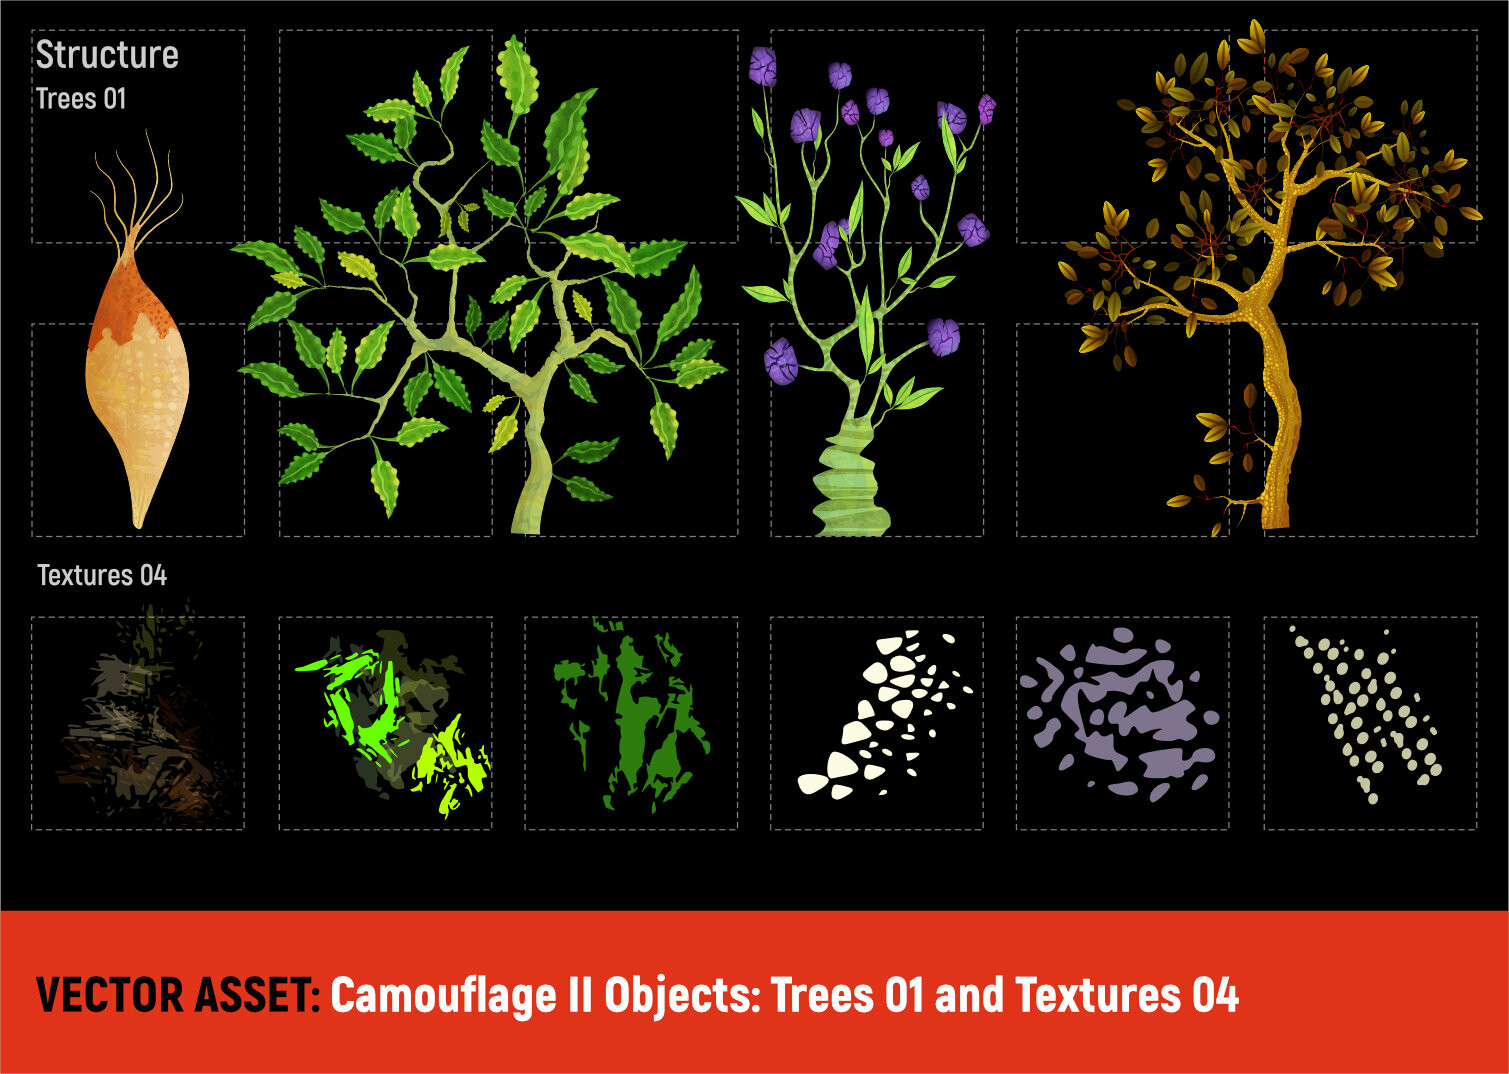 Vector Assets: Camouflage 2
Trees and Textures